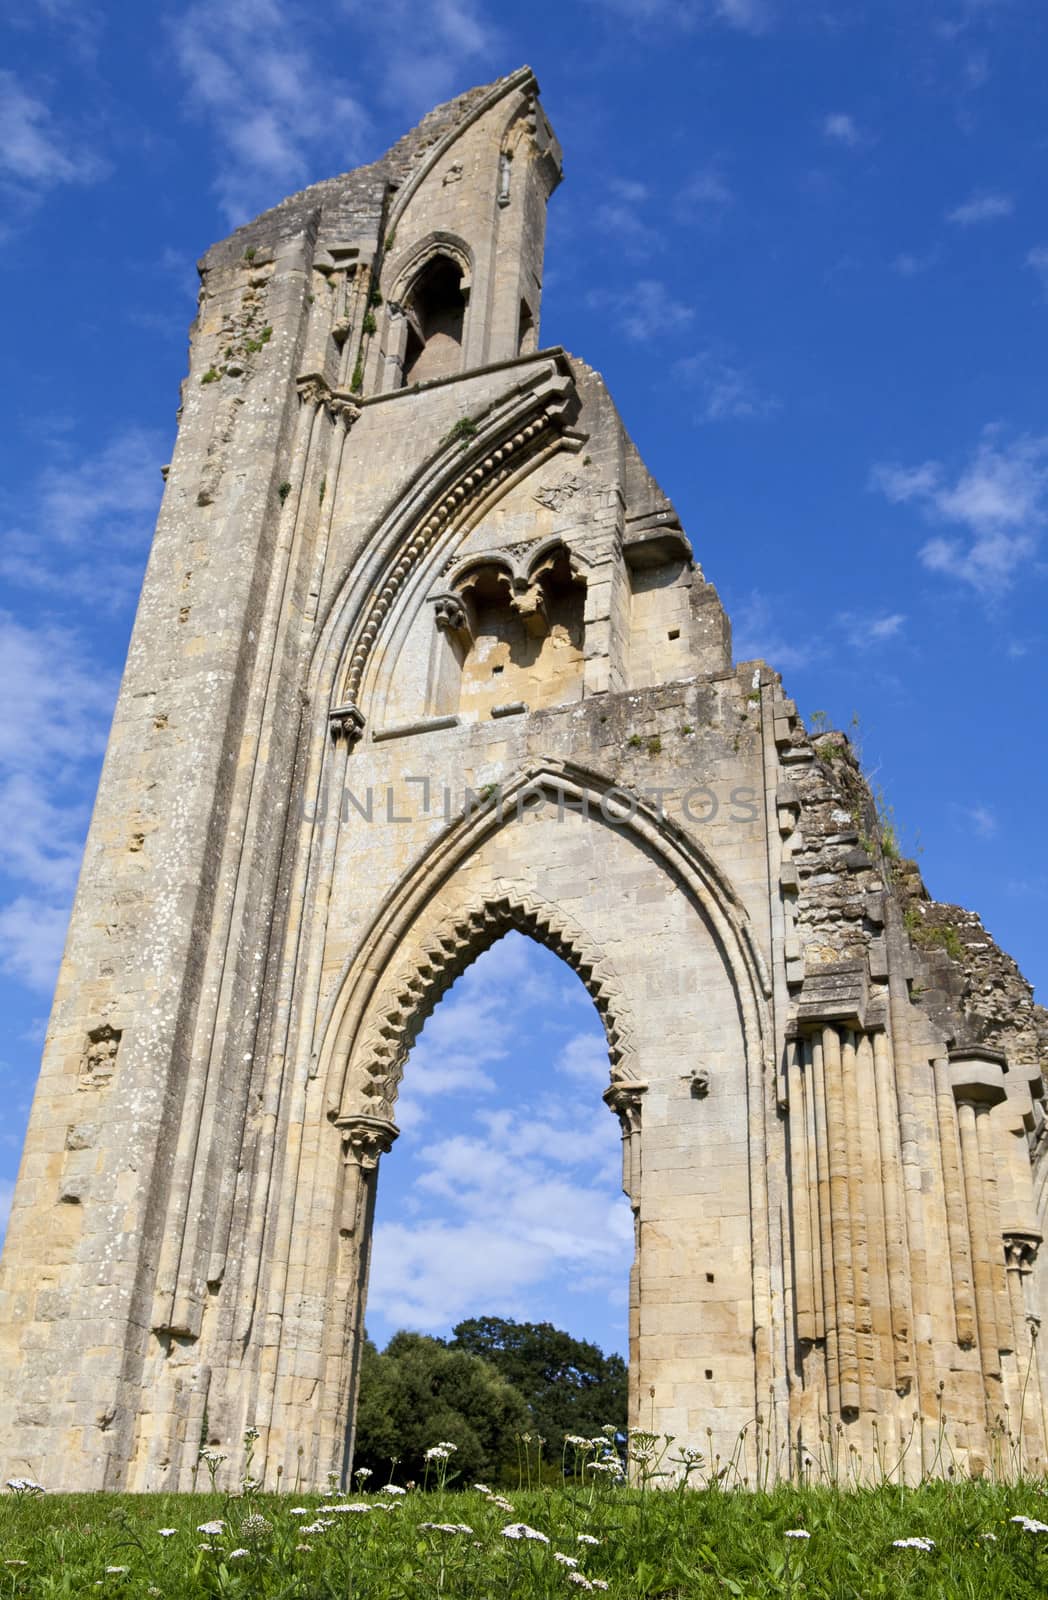 The historic ruins of Glastonbury Abbey in Somerset, England.